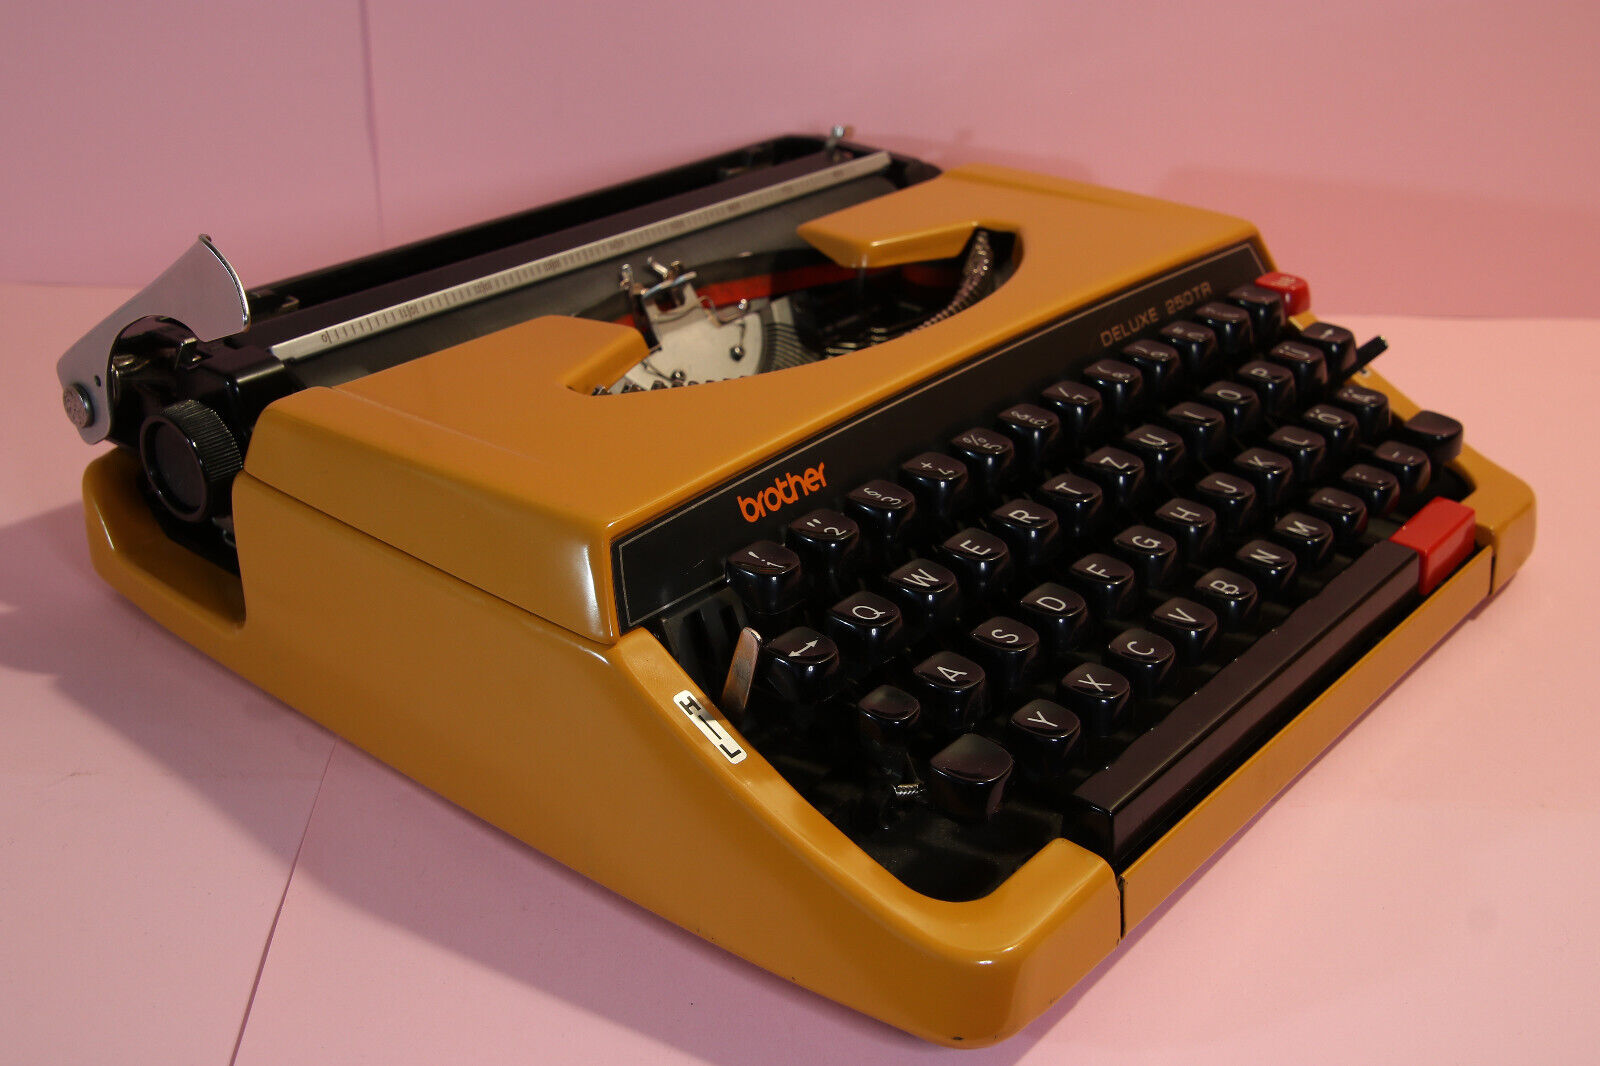 Vintage Brother Deluxe 250TR typewriter mango -yellow color with own black case